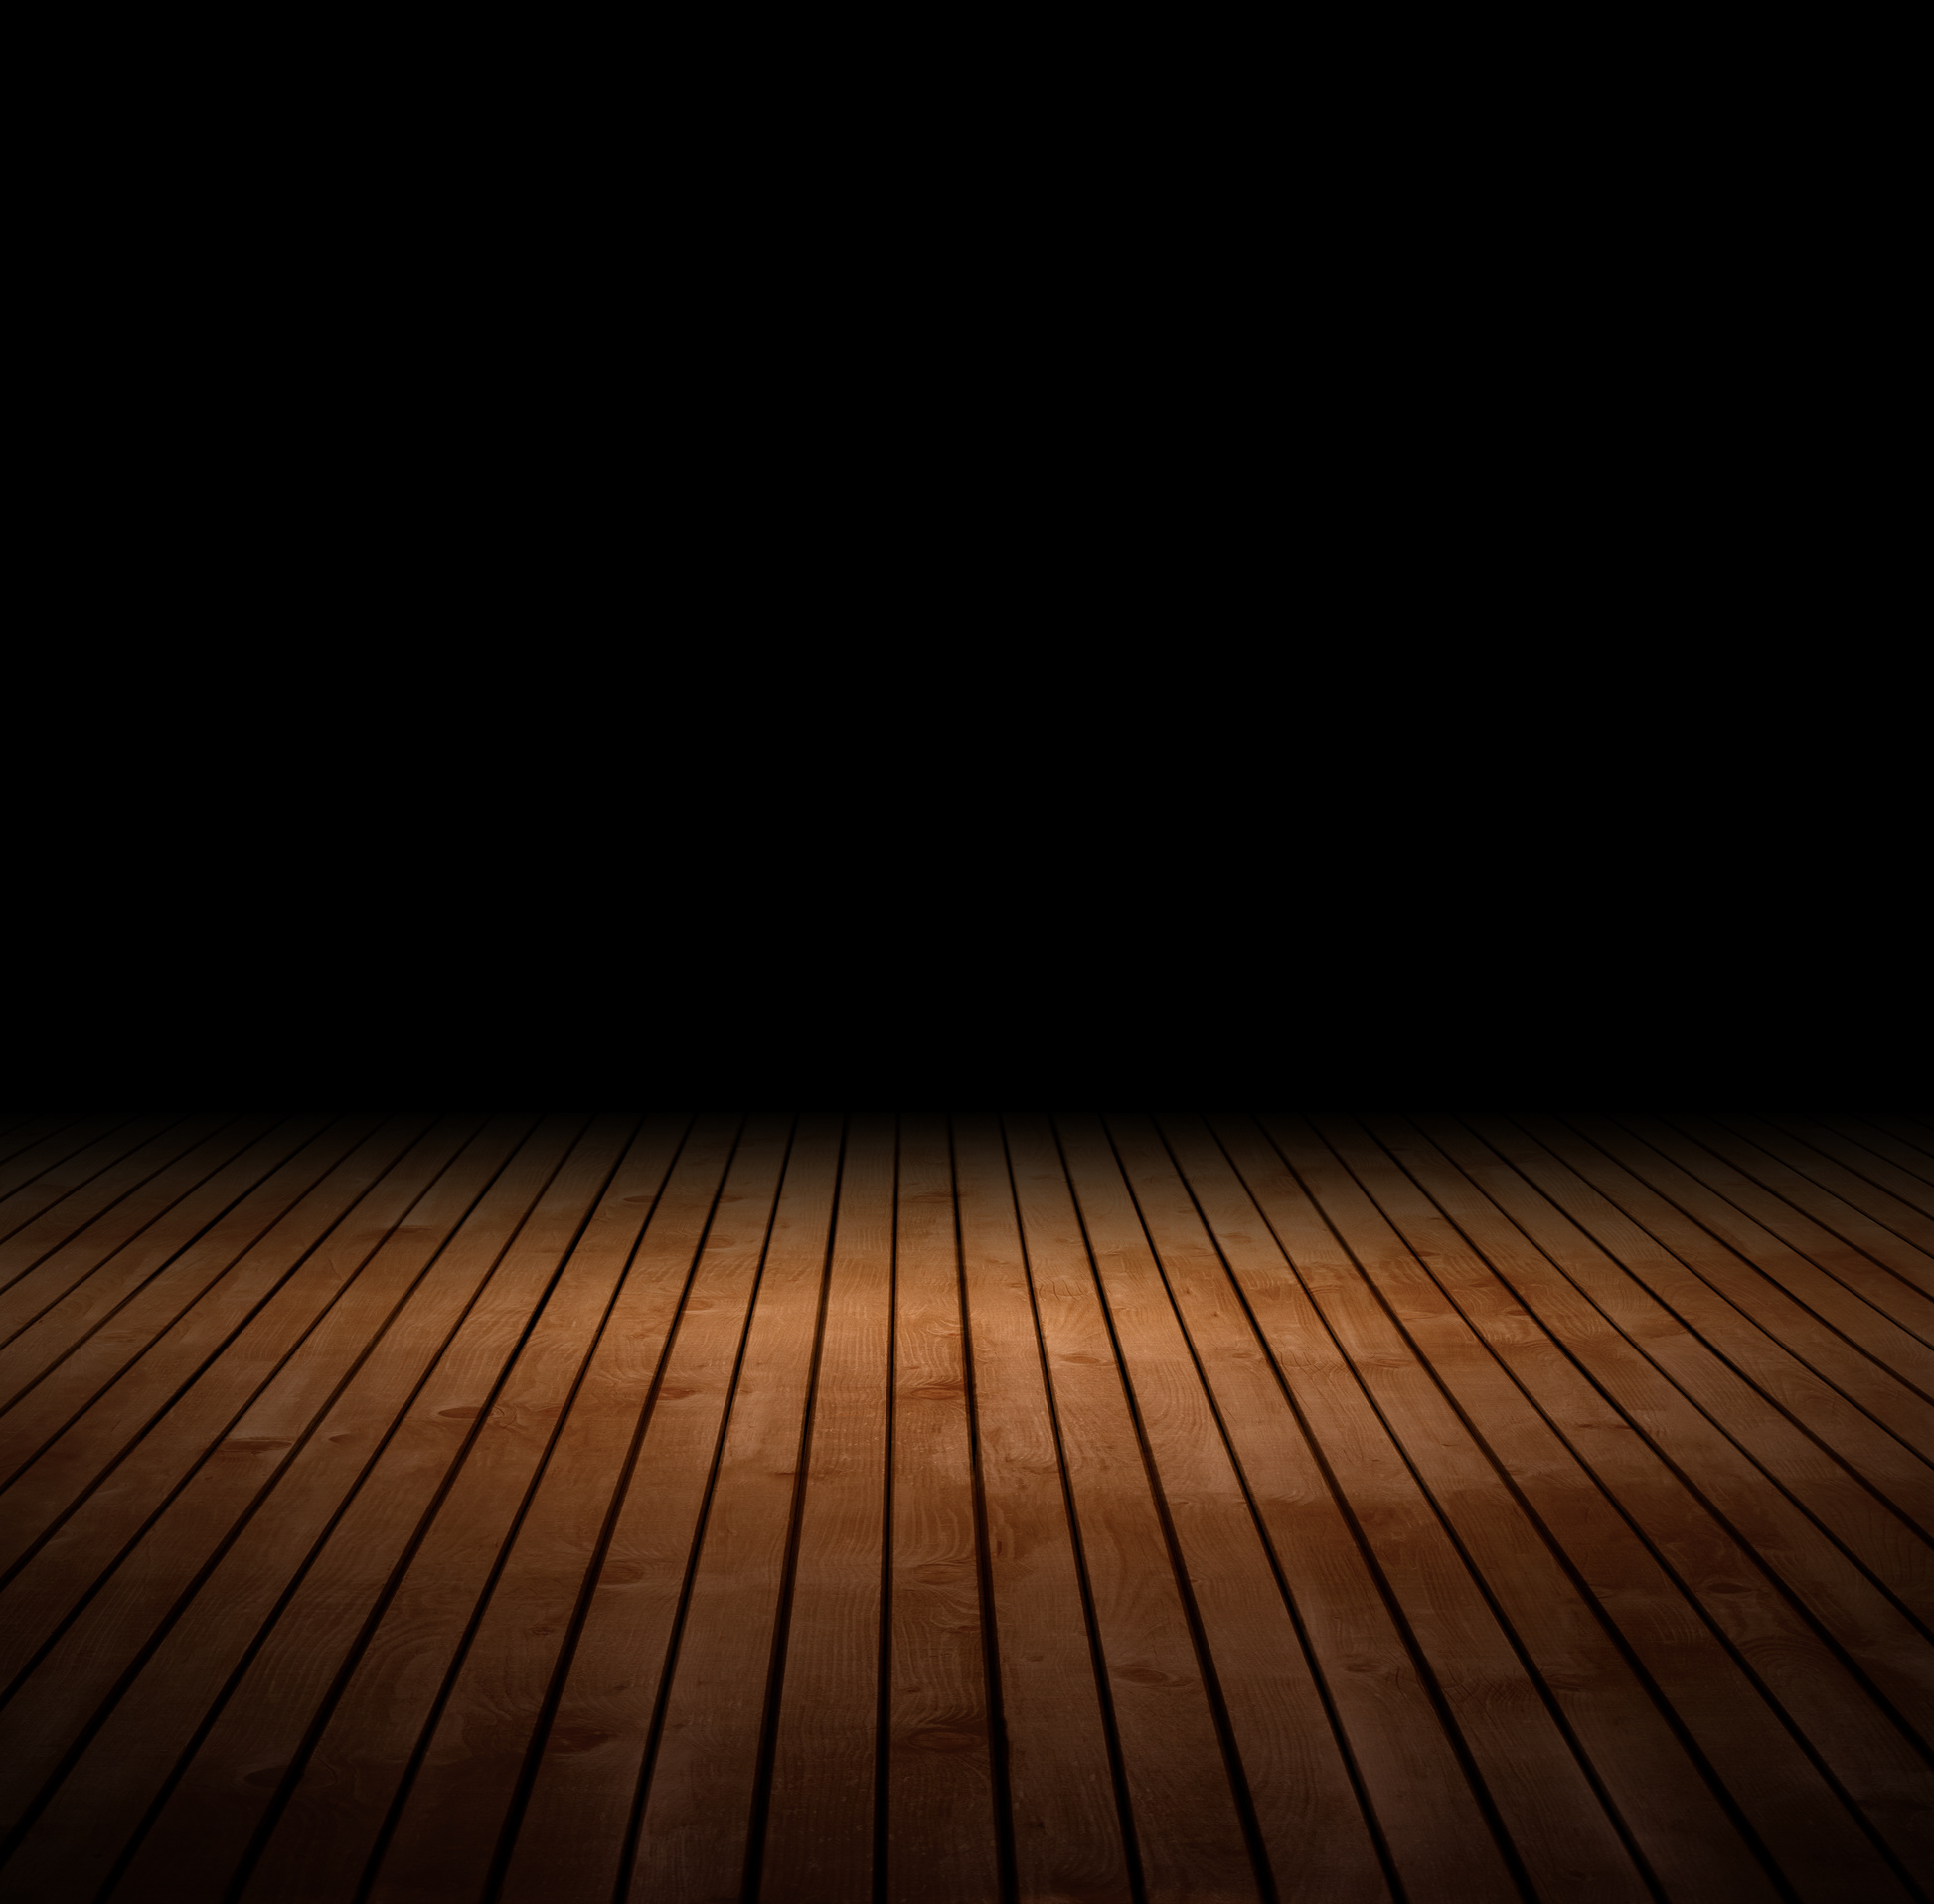 Wood Floor and Black Background